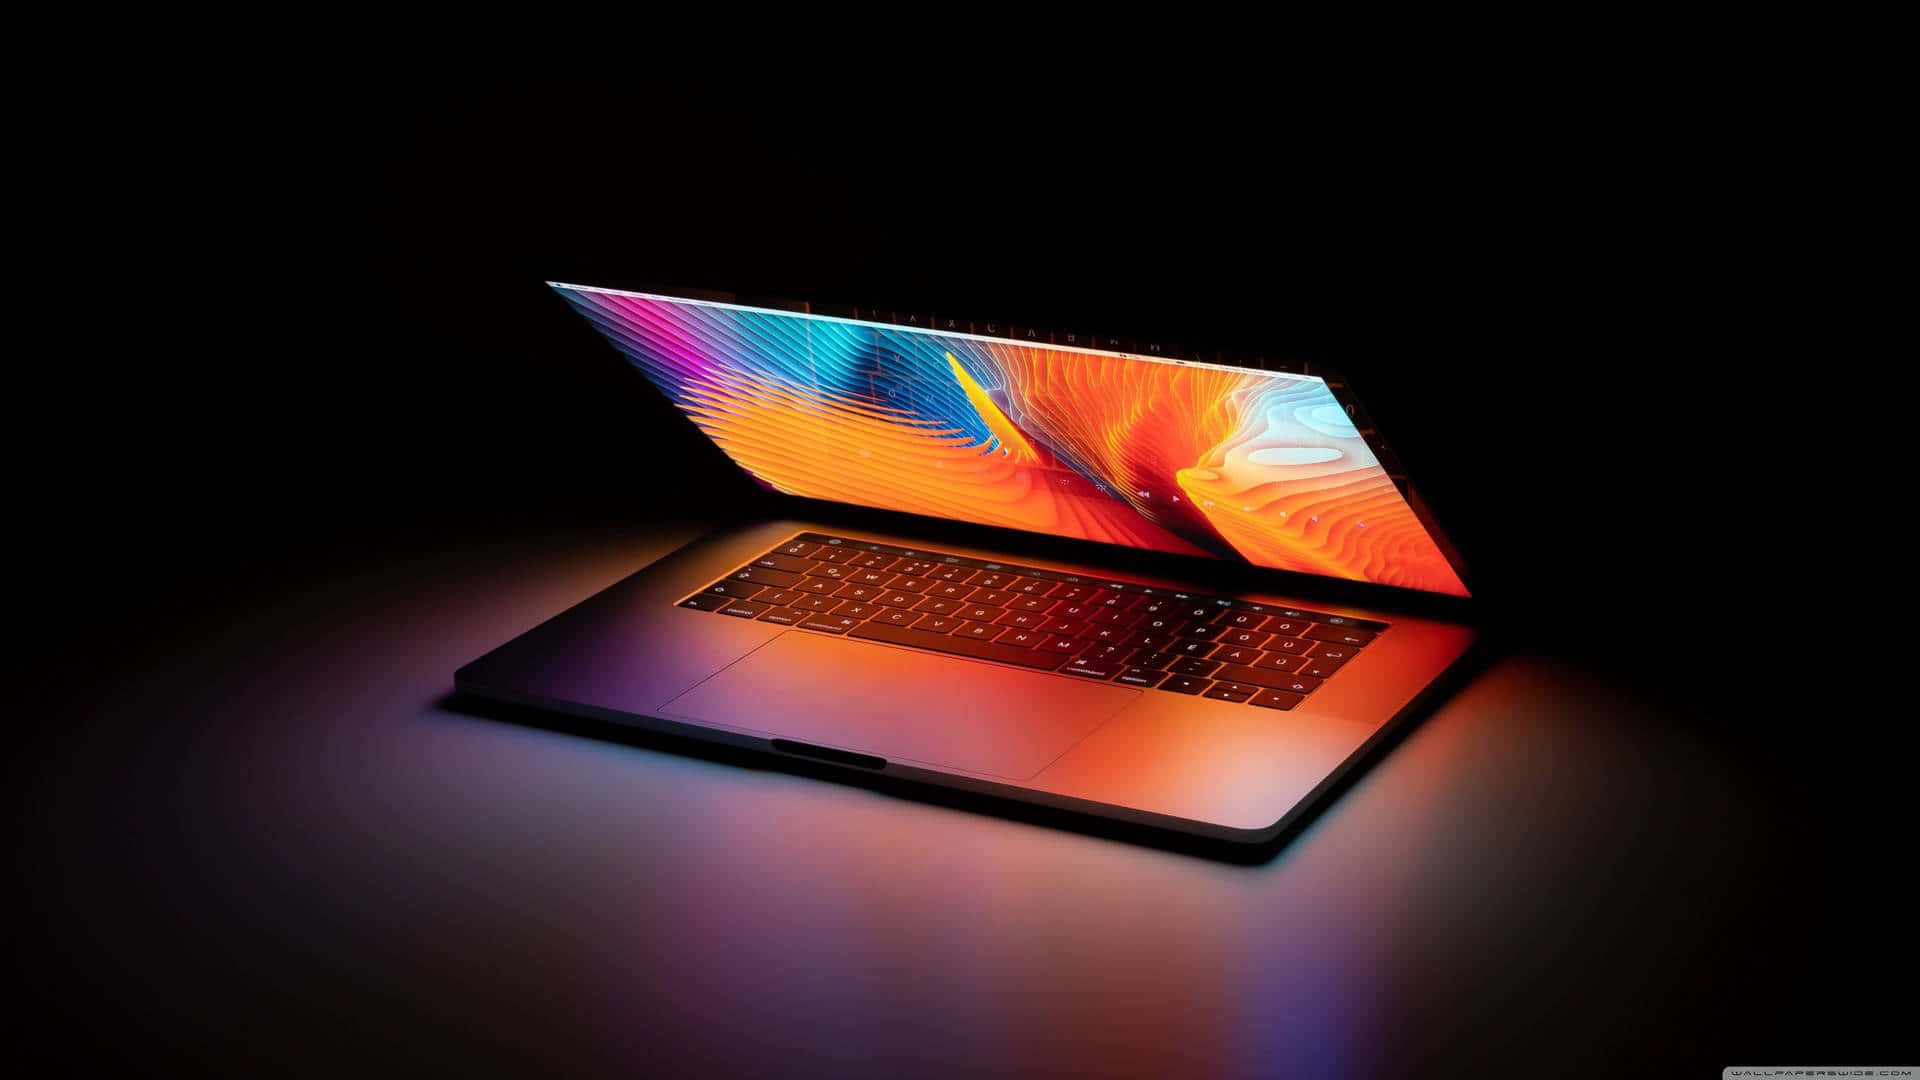 A powerful black Macbook to get your work done. Wallpaper